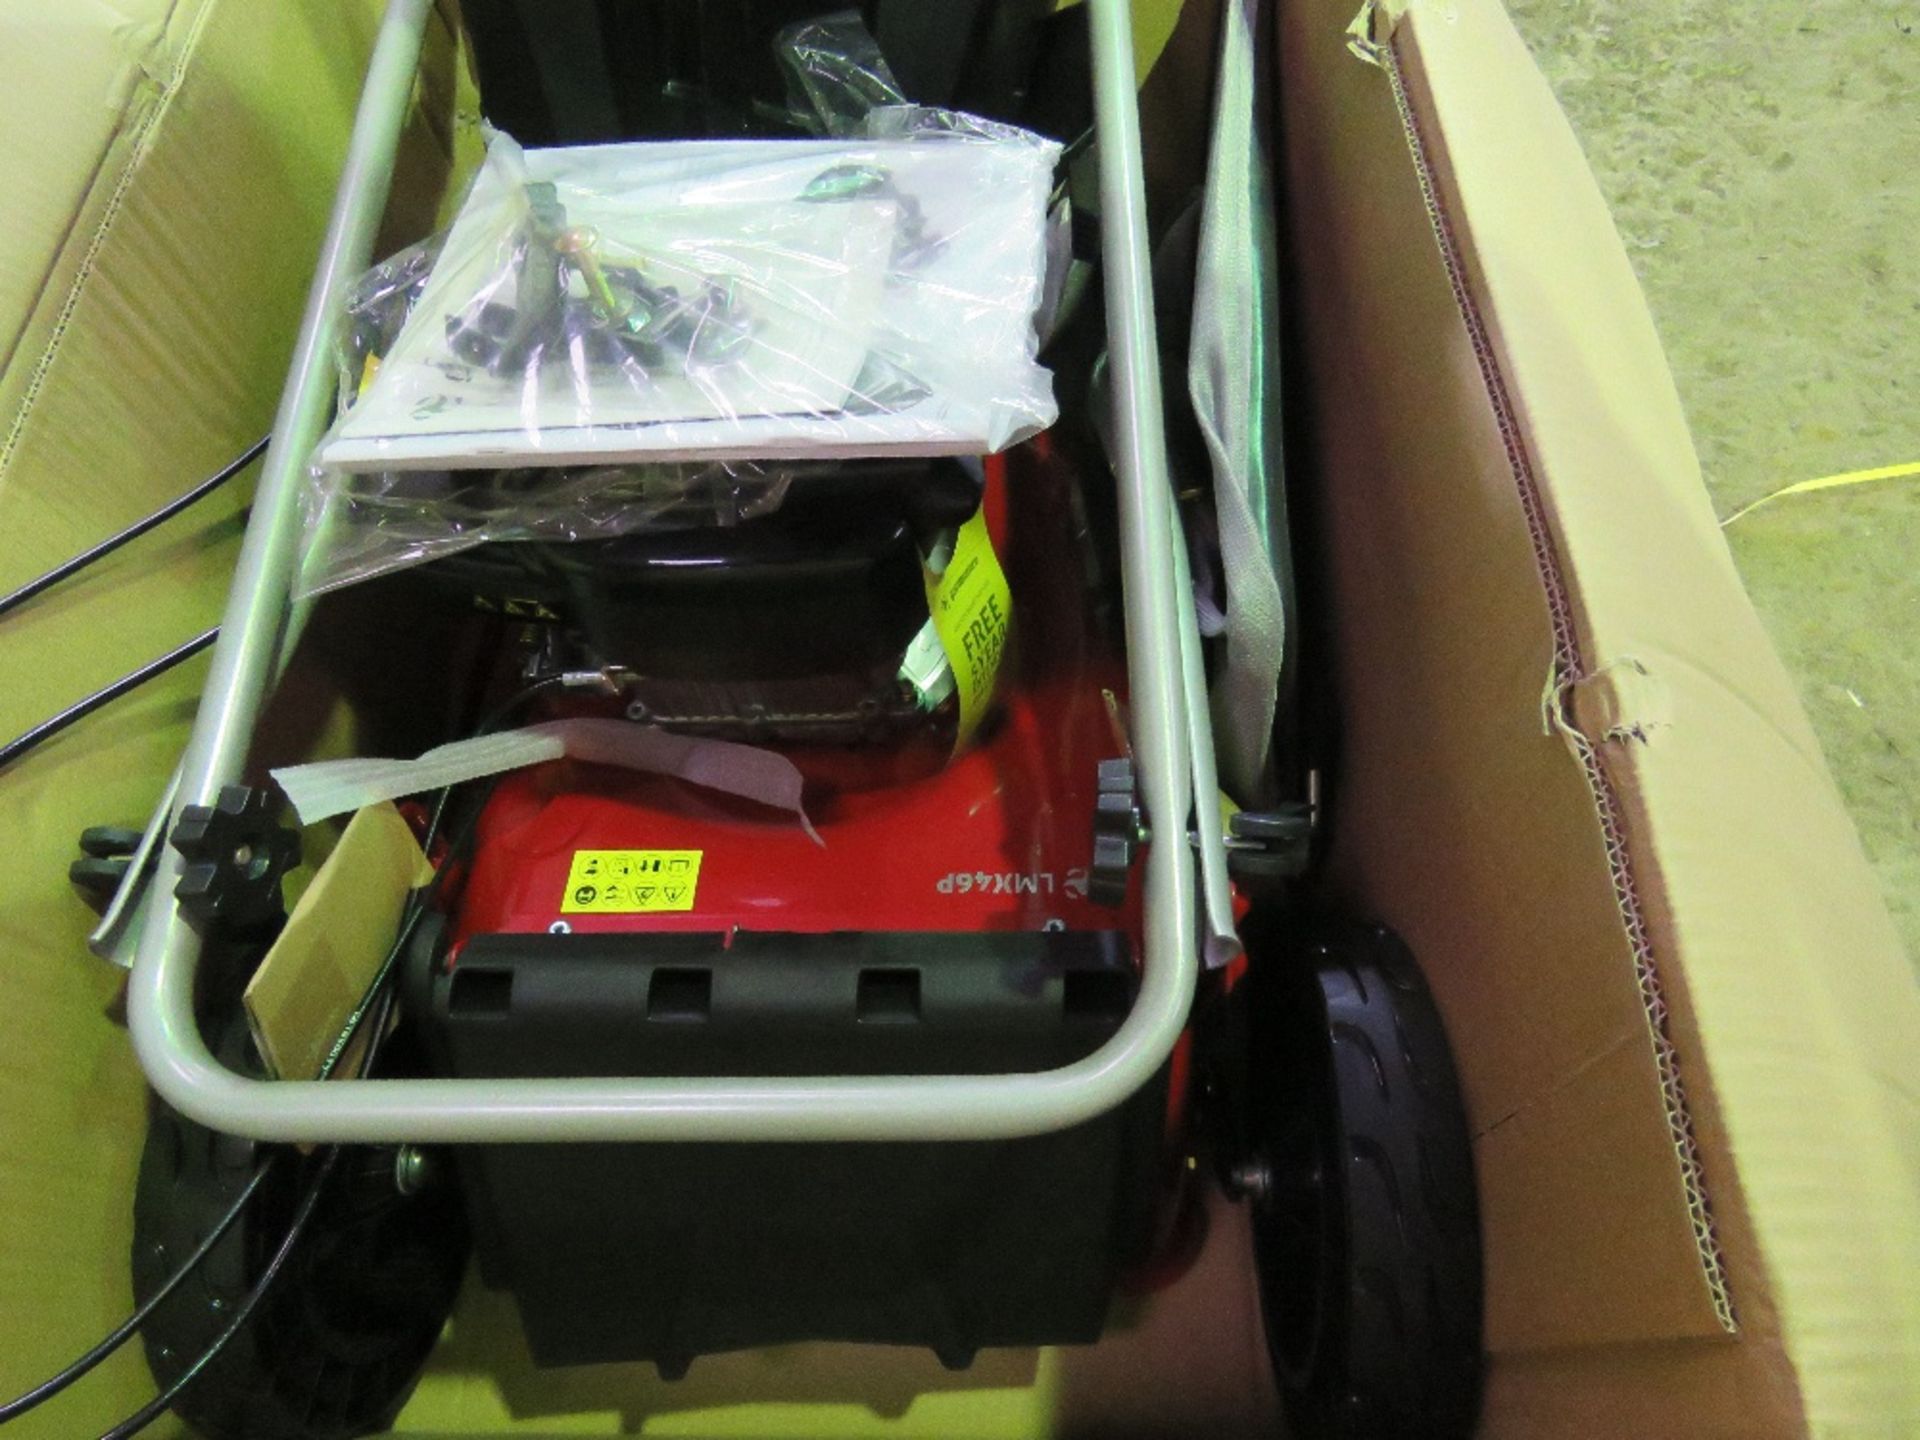 GARDENCARE LMX46 LAWNMOWER. BOXED, UNUSED, DIRECT FROM LOCAL COMPANY BEING SURPLUS STOCK. - Image 4 of 4